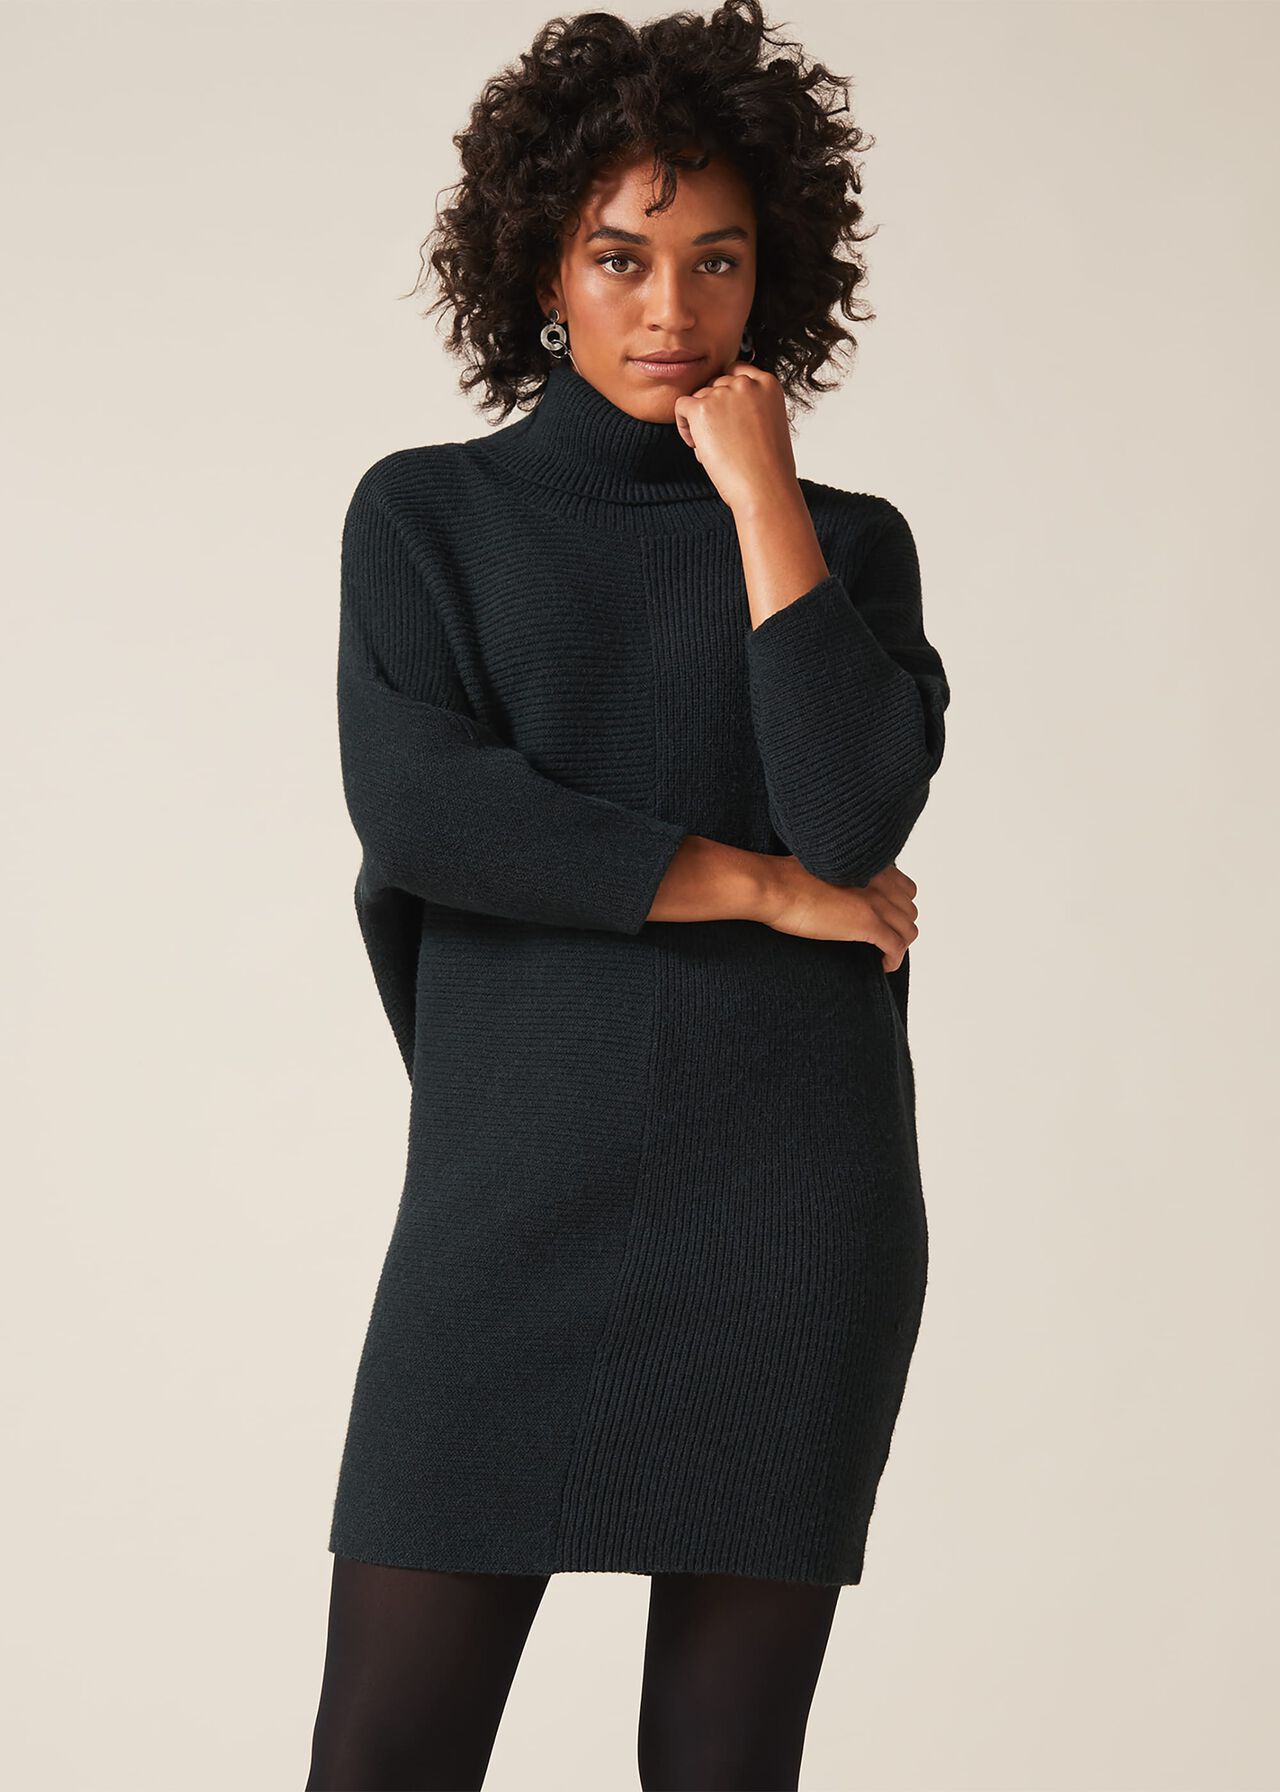 Catheline Cowl Soft Touch Dress | Phase Eight